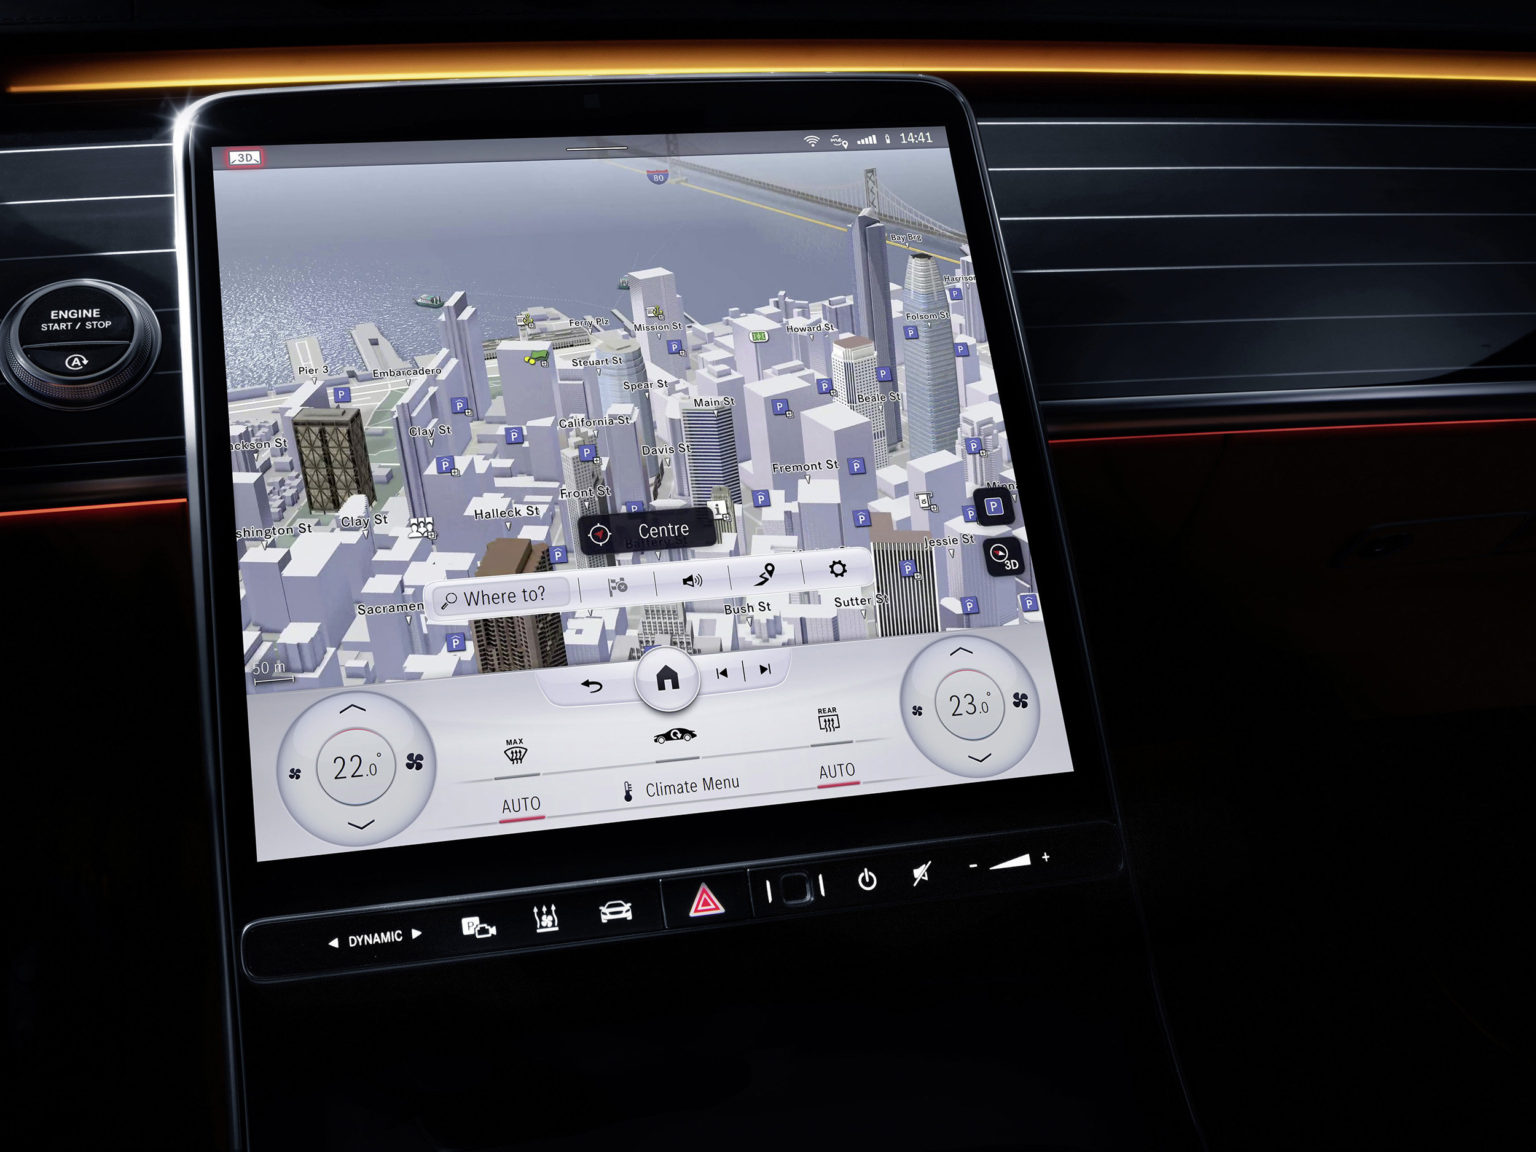 The improved MBUX system has new features for the 2021 model year S-Class.